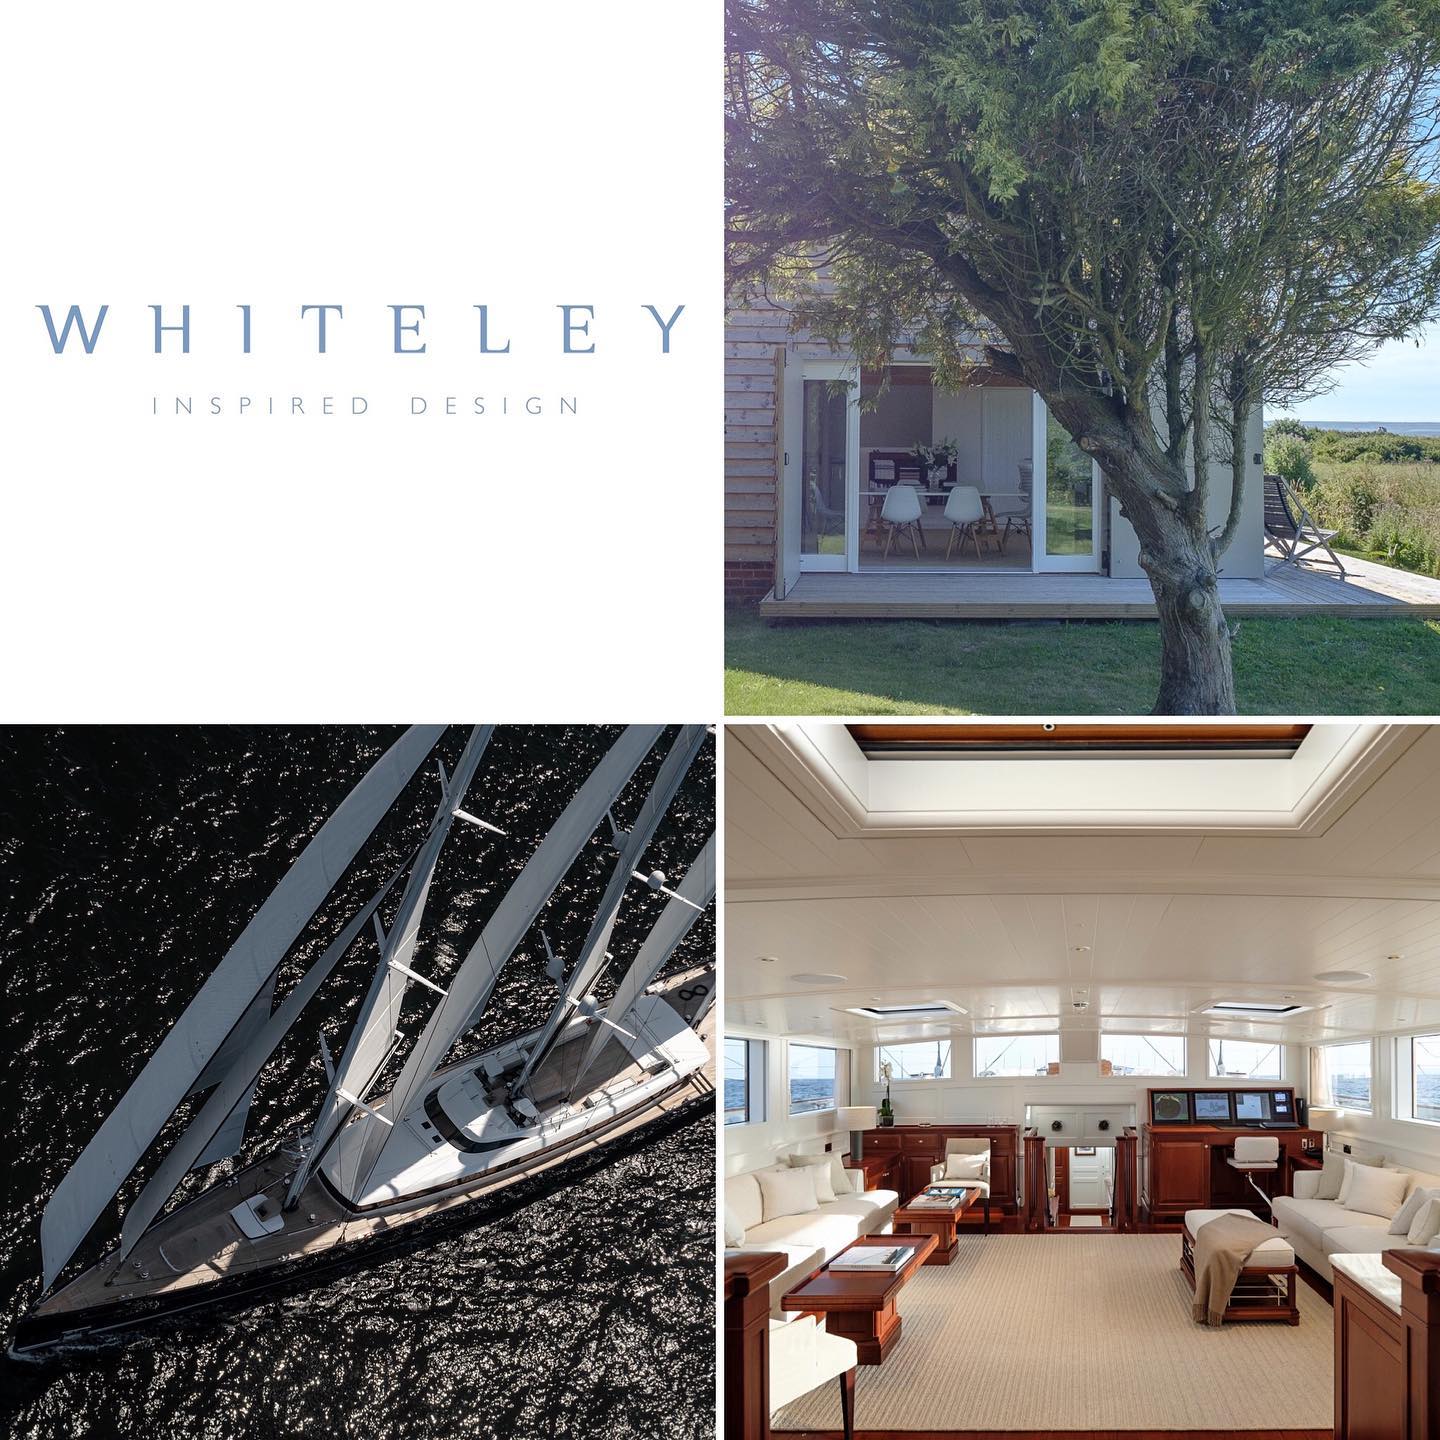 WE ARE HIRING!!

Mark Whiteley Design are looking for an experienced senior designer/project manager to join our team based in Lymington. 
Contact studio@markwhiteleydesign.com

#superyachtdesign #interiordesign #projectmanager #superyacht #aquarius #seaeagle2